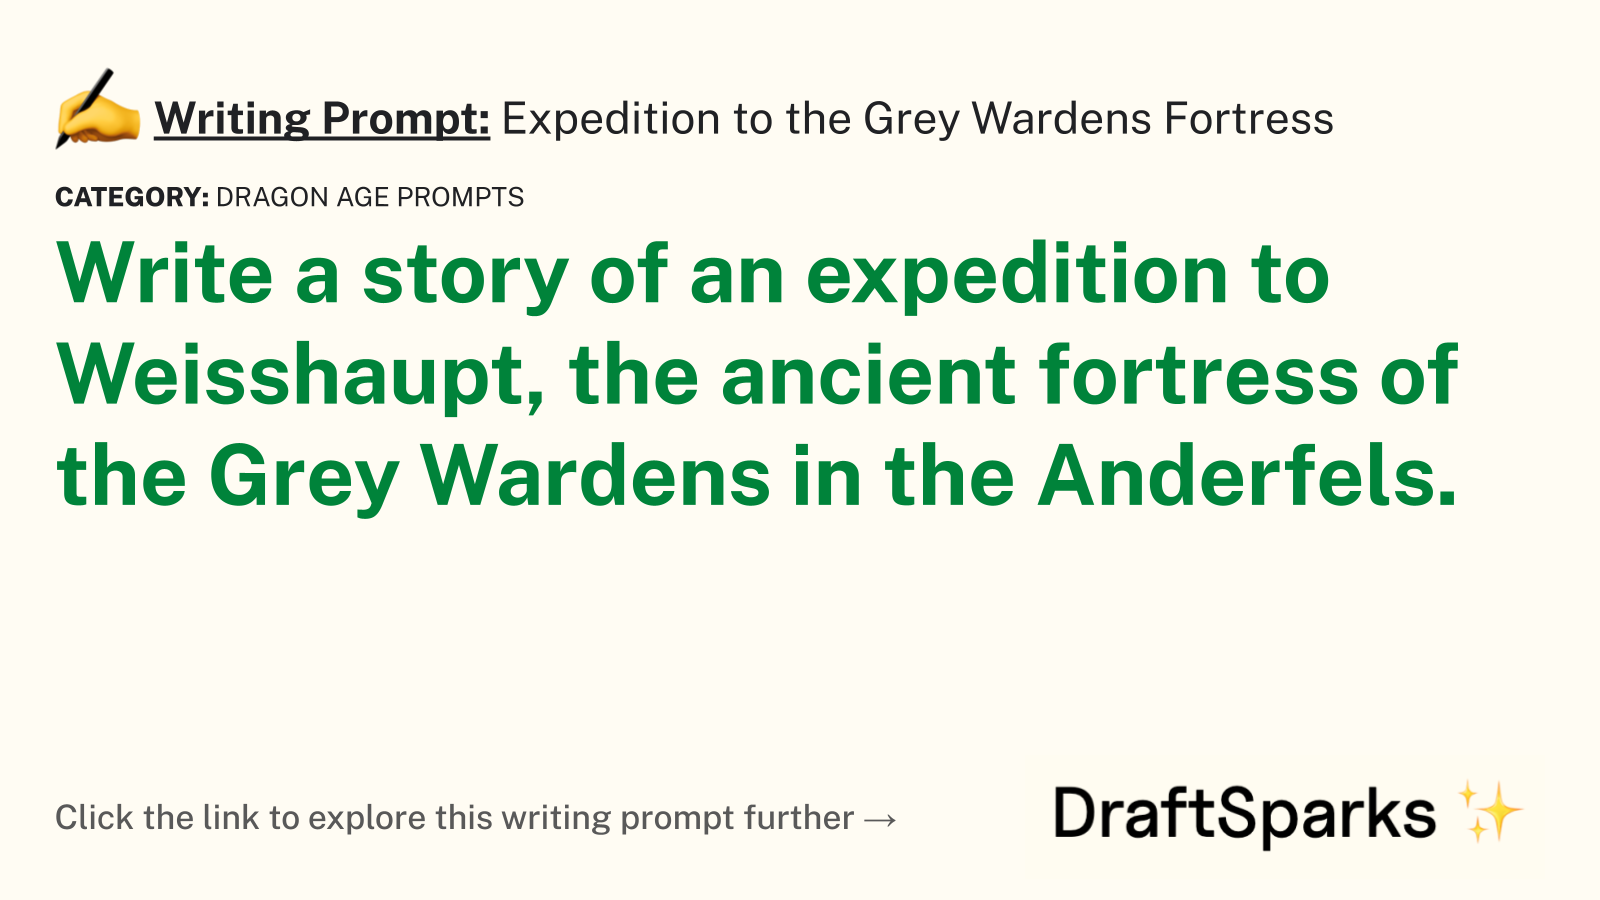 Expedition to the Grey Wardens Fortress